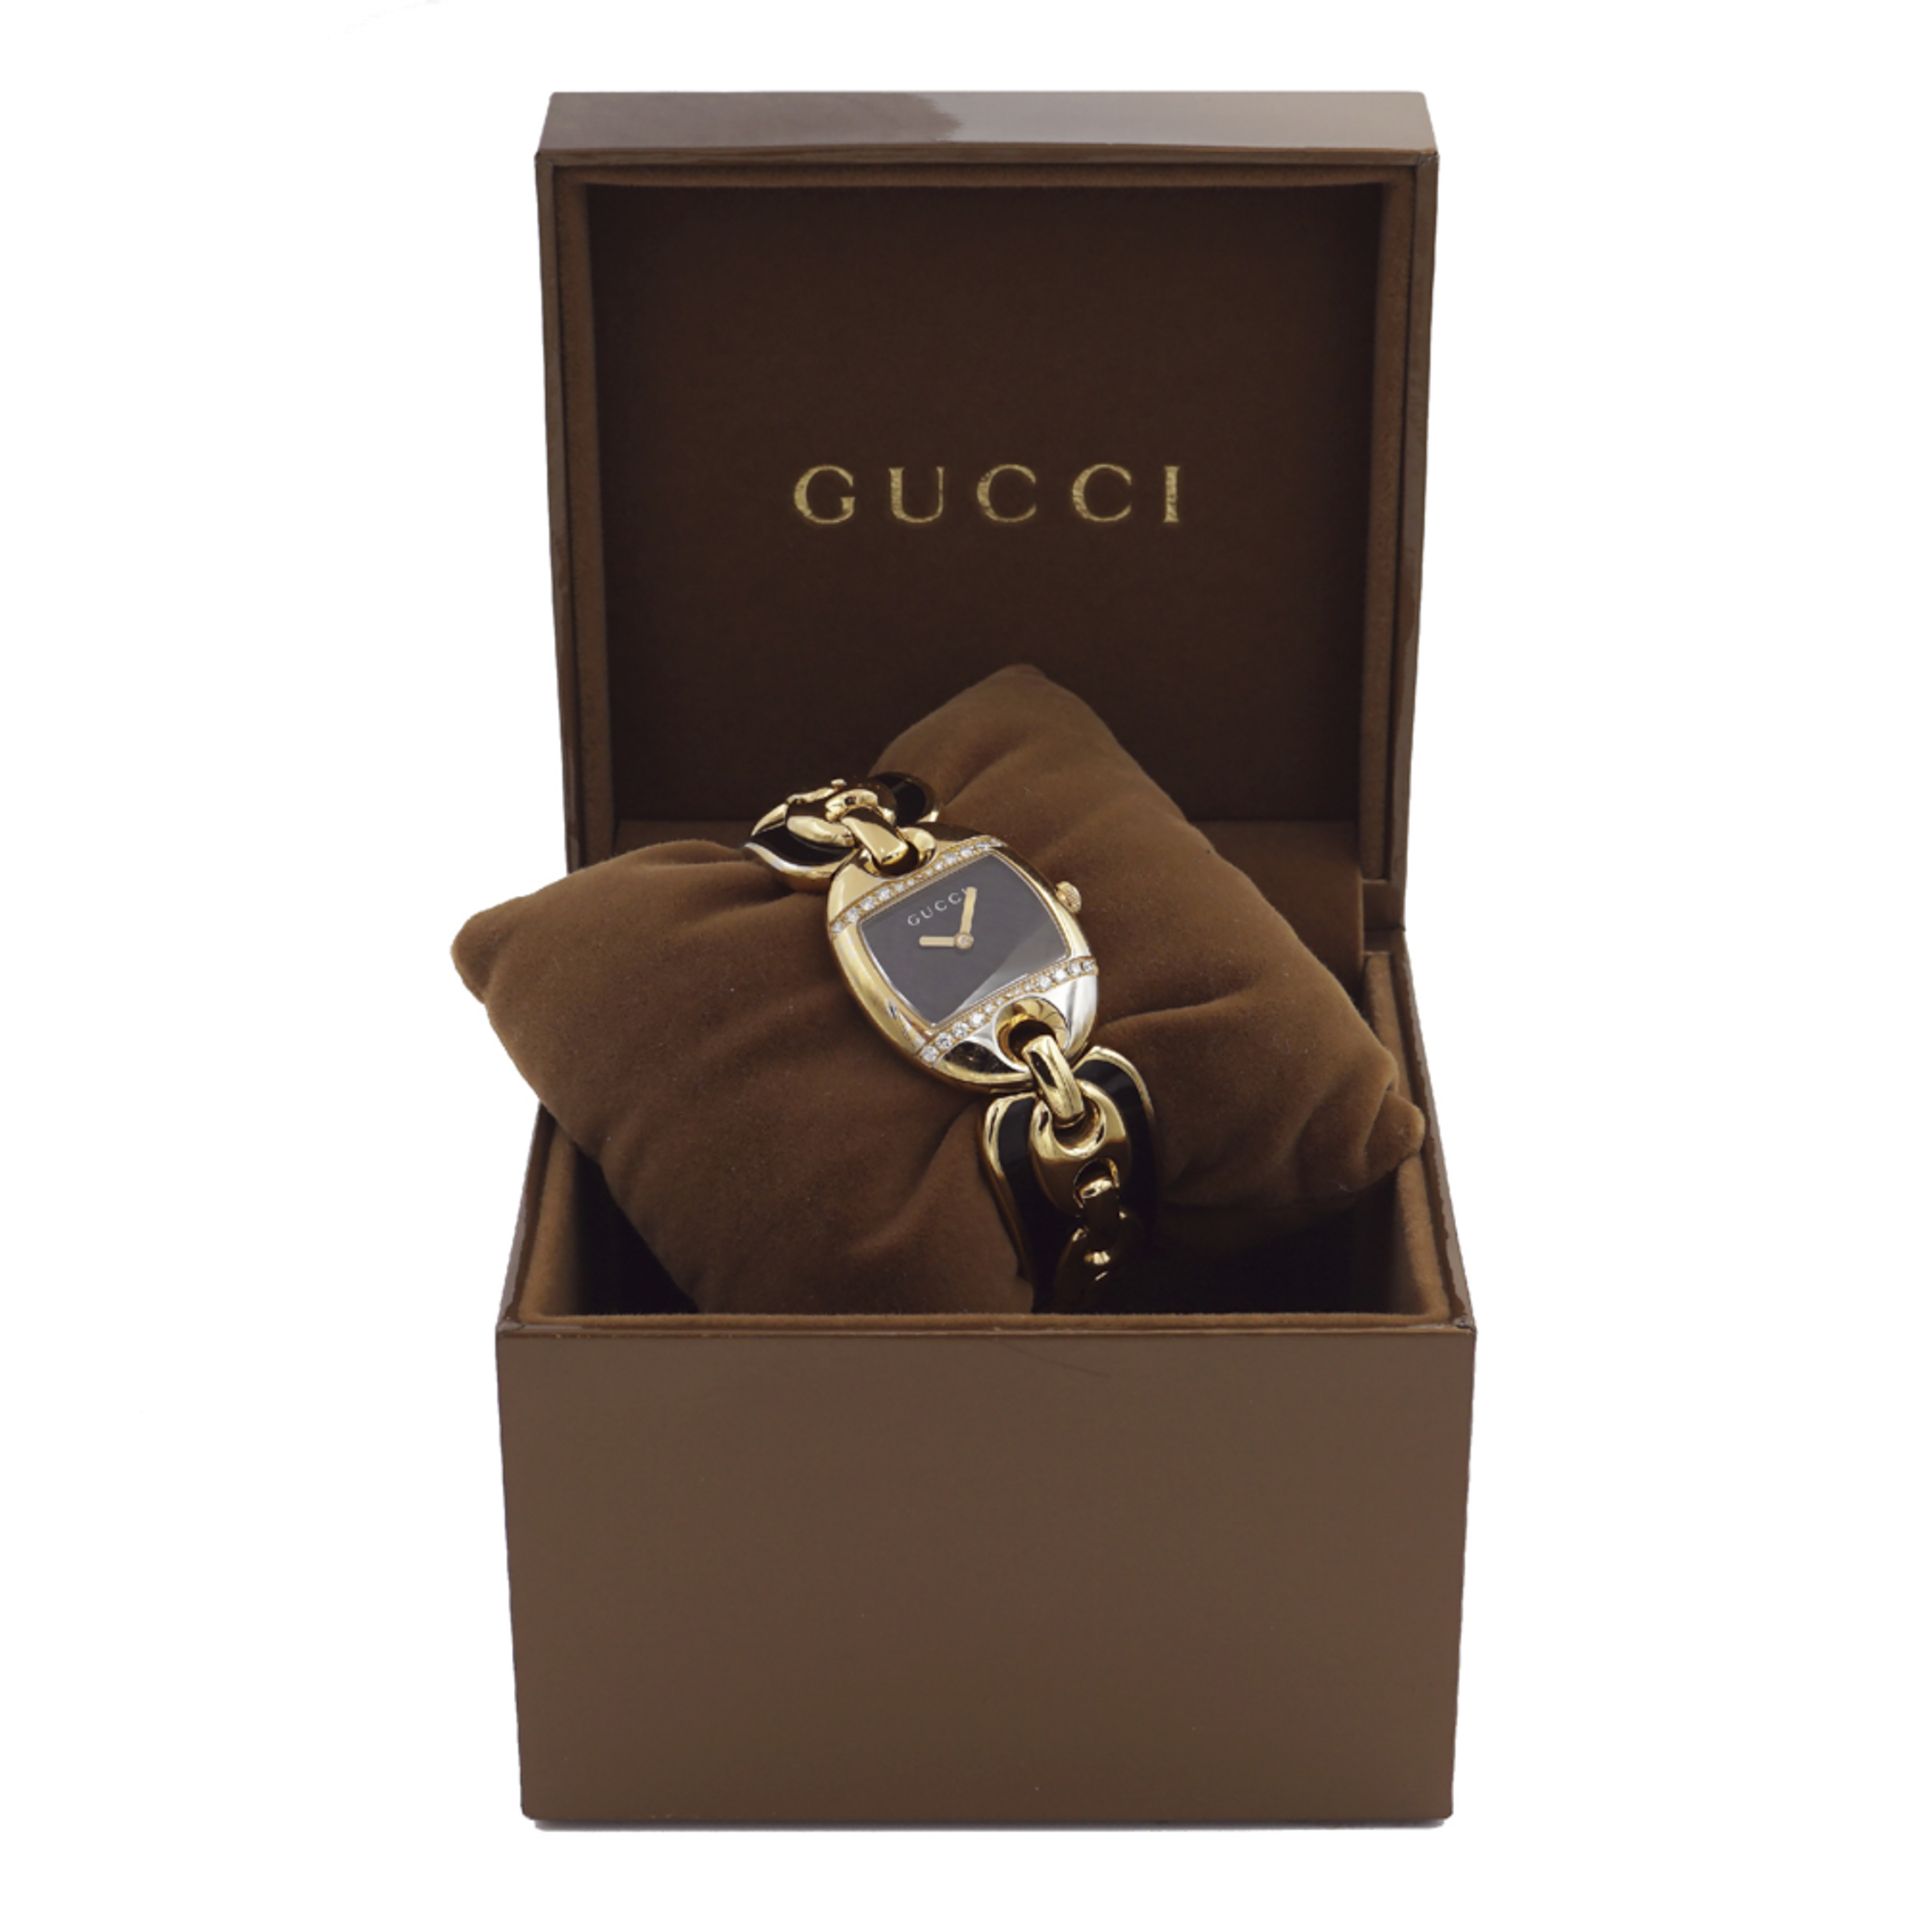 Gucci "Marina" collection ladies watch - Image 2 of 4